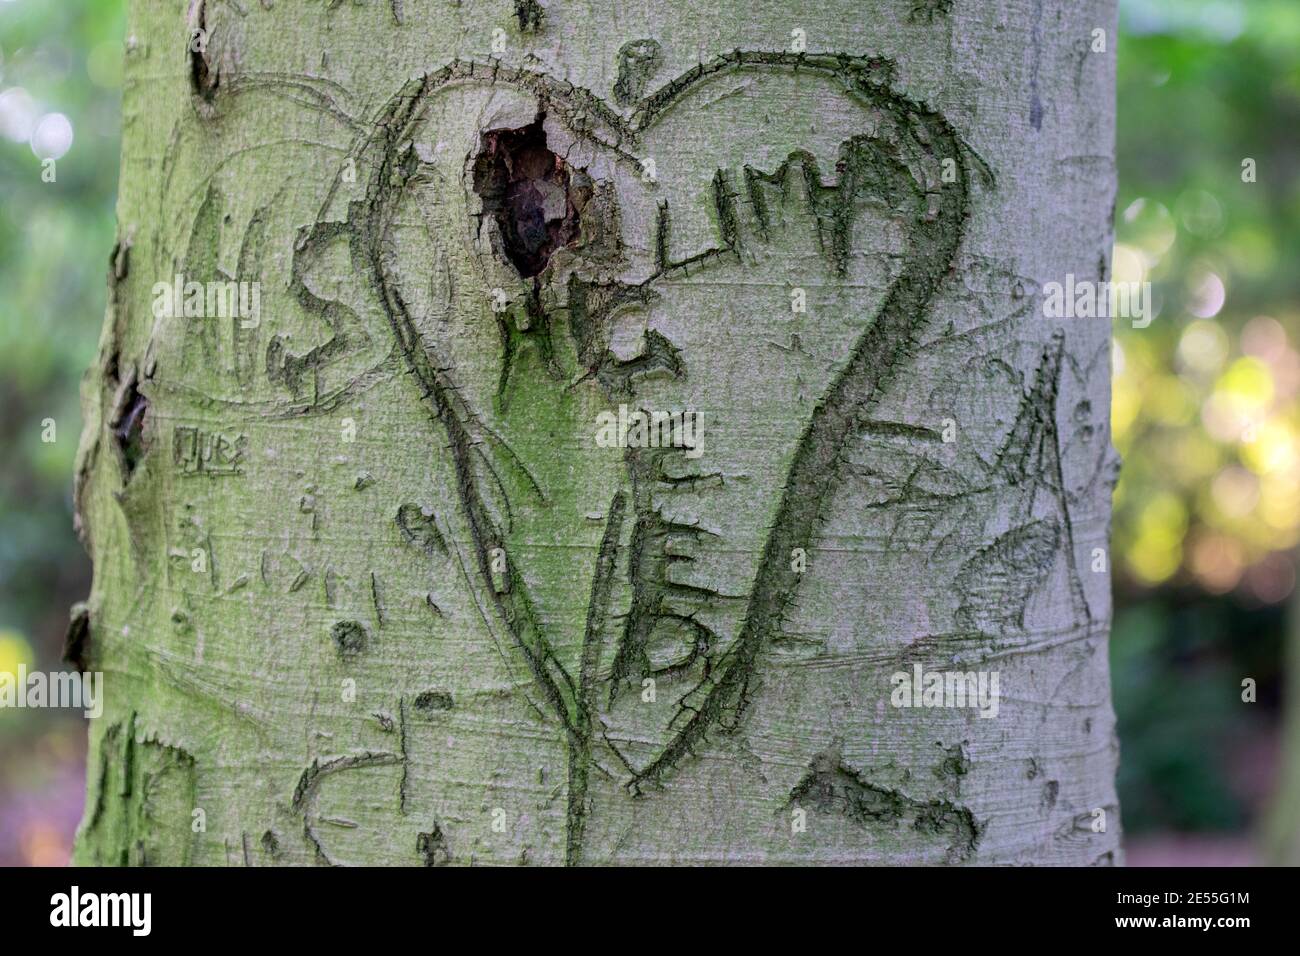 Close Up Of A Heart Carved In A Tree At Amsterdam The Netherlands 26-6-2020 Stock Photo